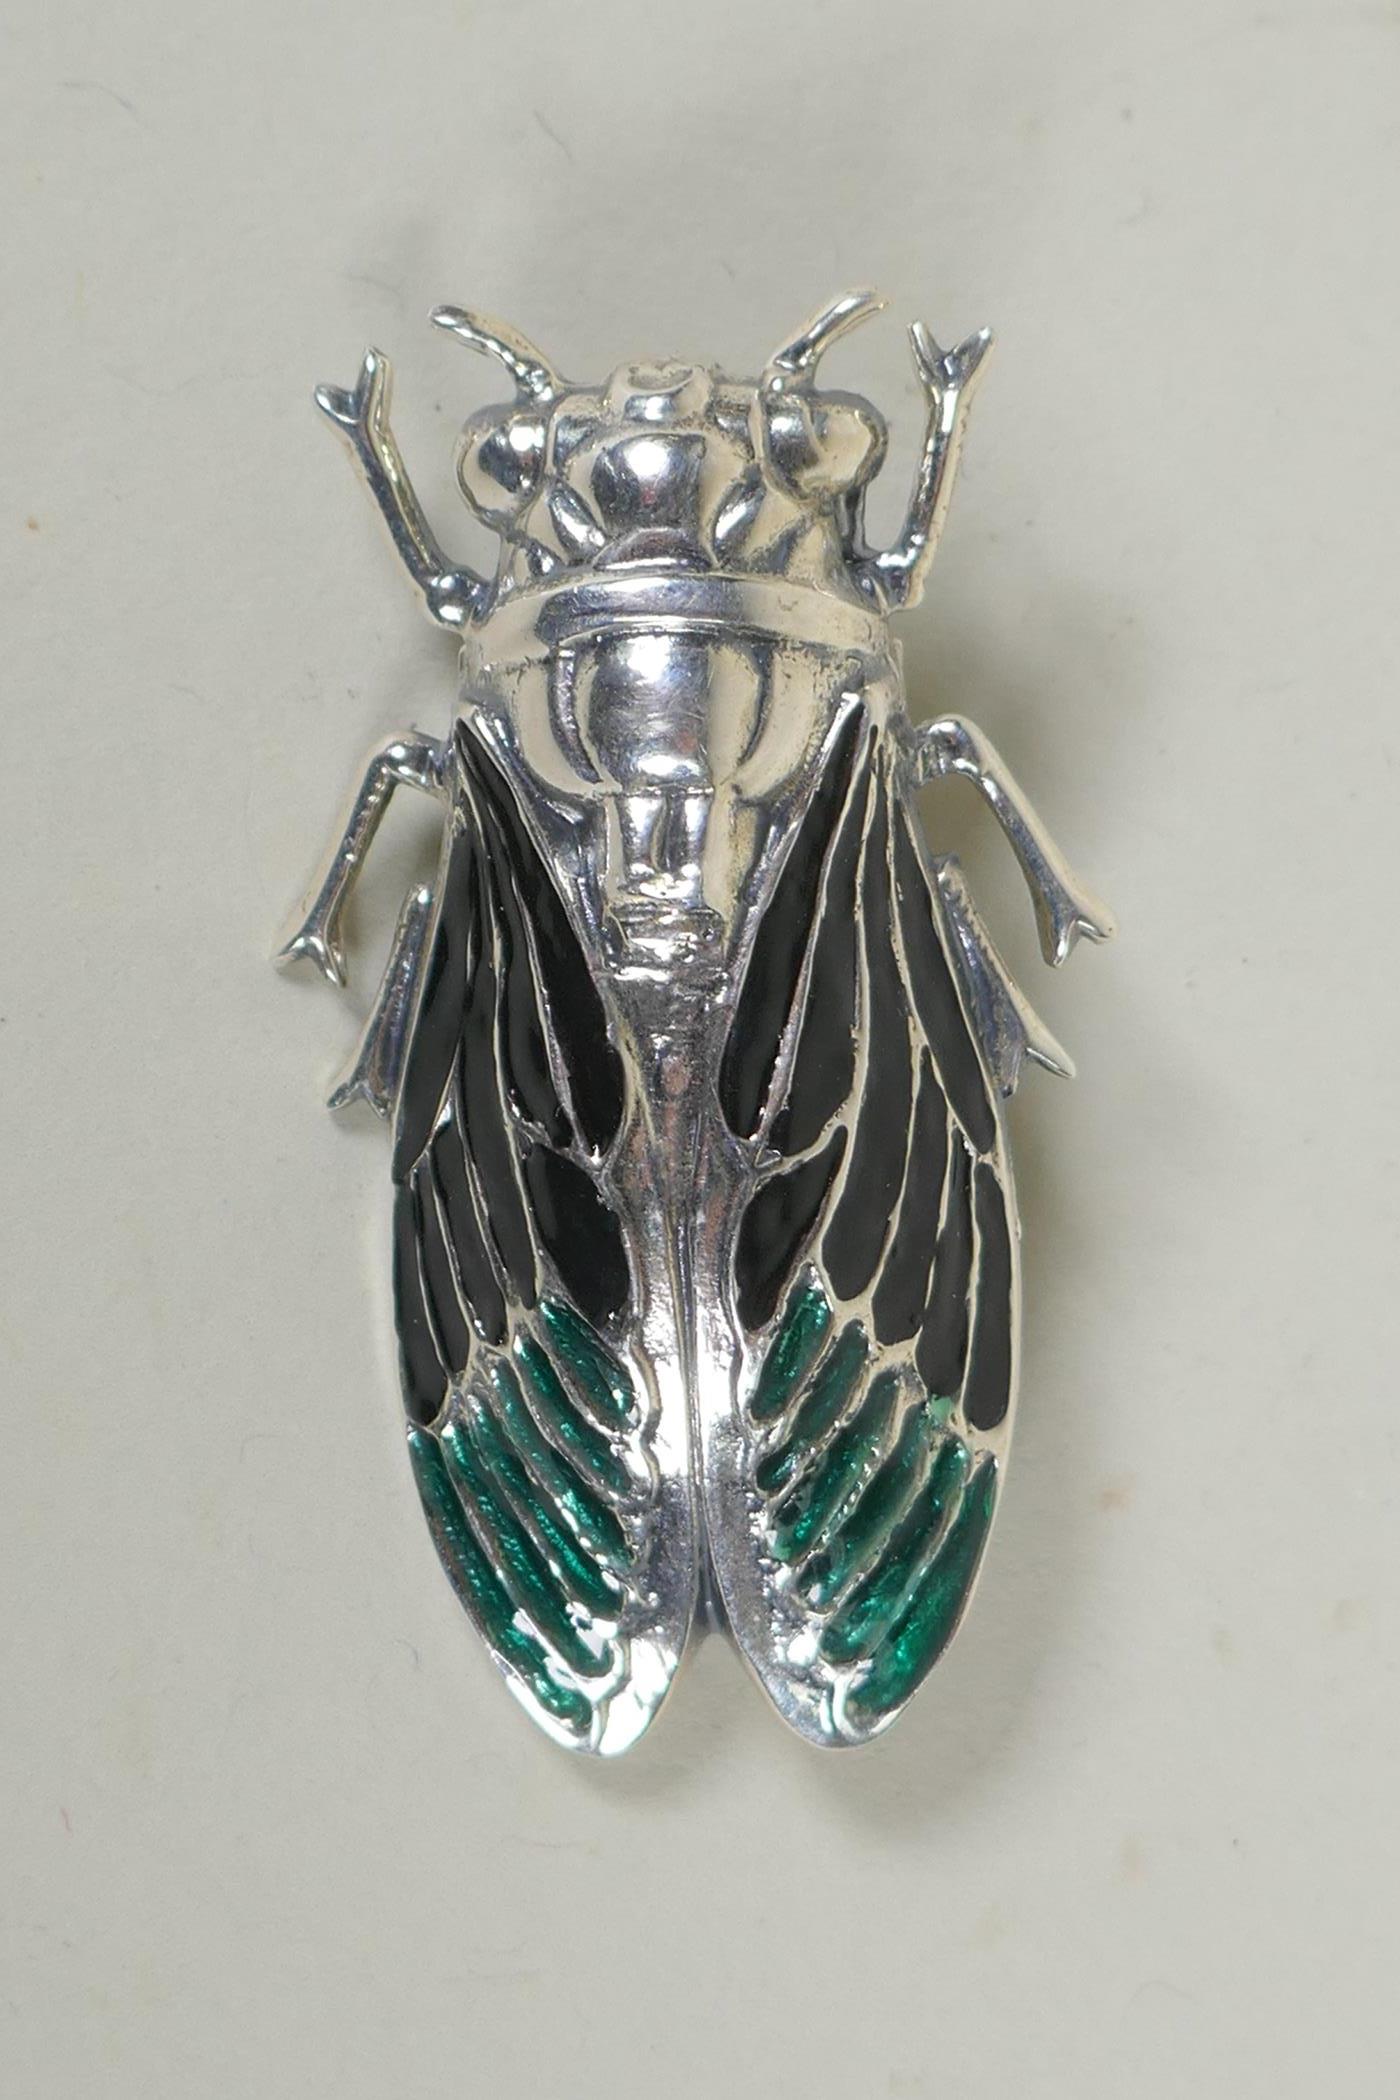 A sterling silver and enamel brooch in the form of a cicada, 5cm